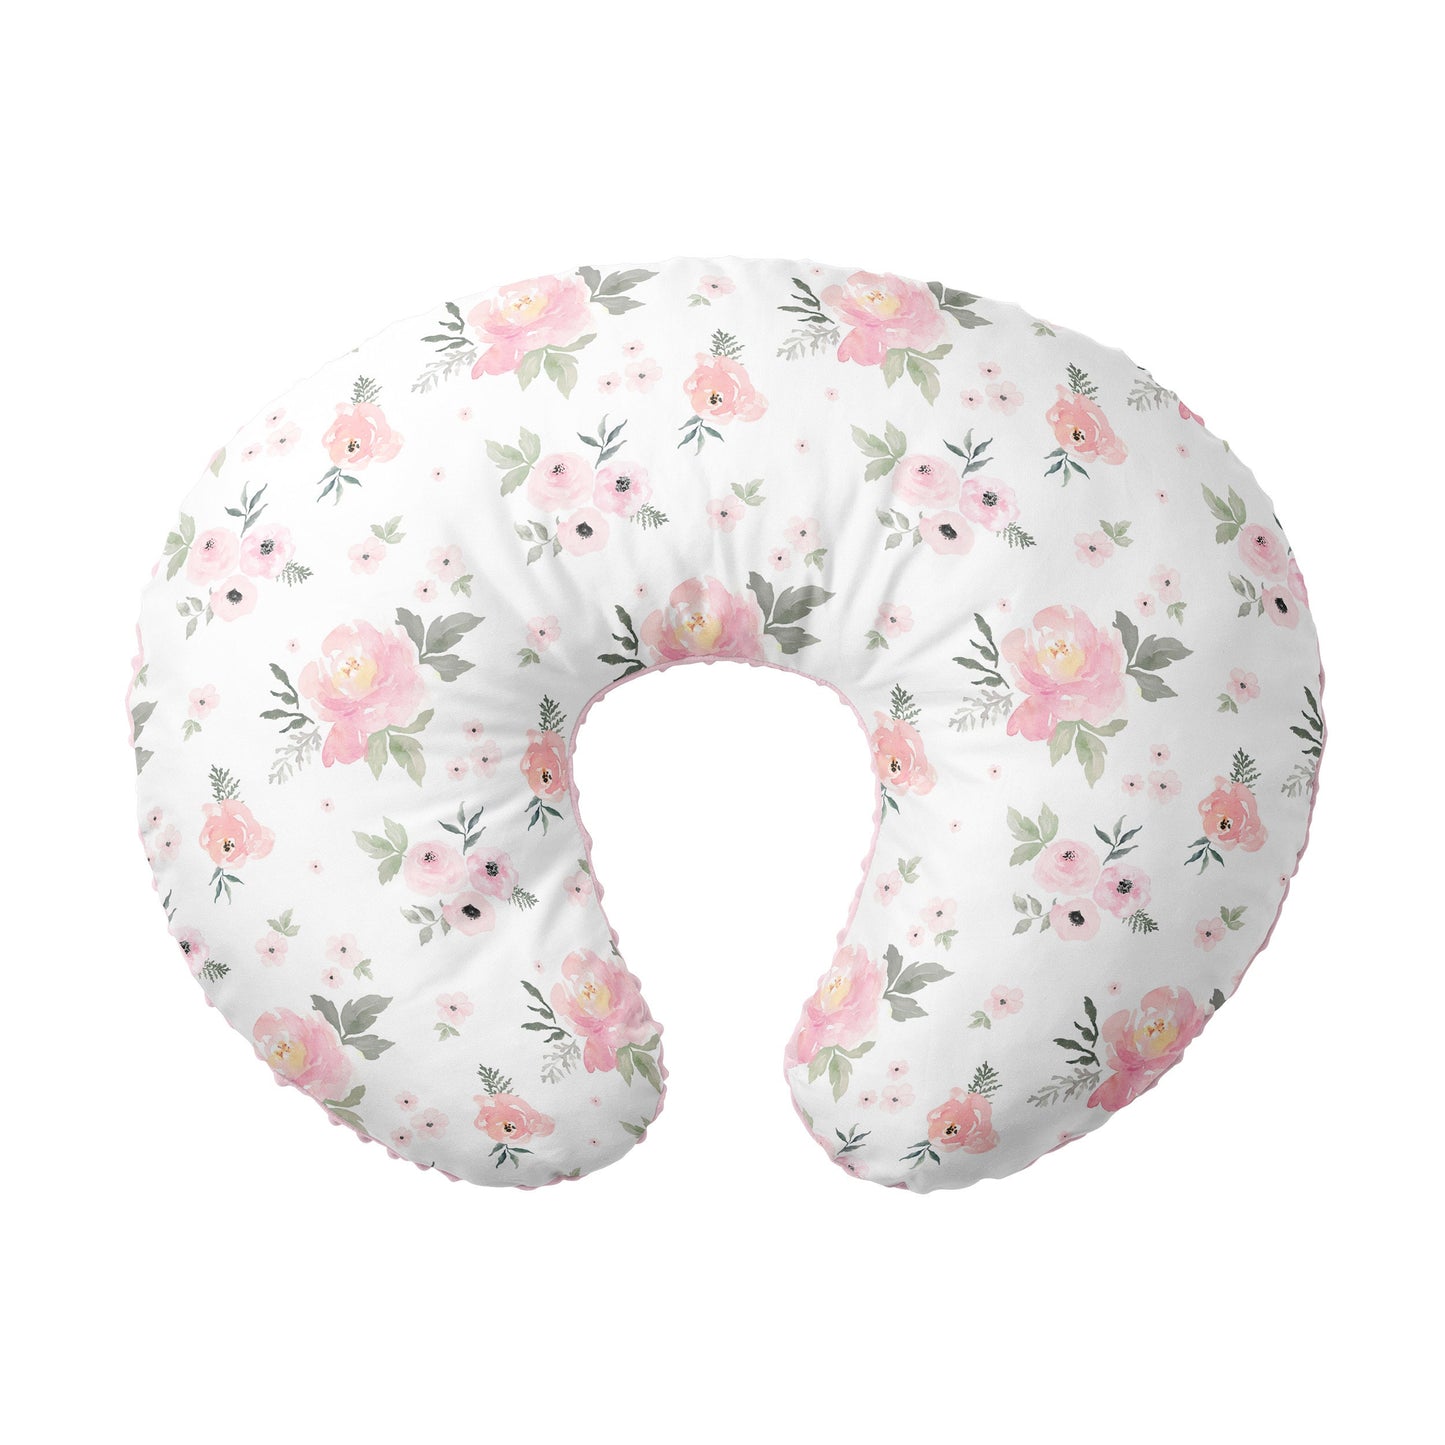 Nursing Pillow Cover,100% Cotton, Slipcover Minky Girl - Nursery Decor for Baby Girls Pillow Cover Watercolor Floral (Sweet Blush Roses)